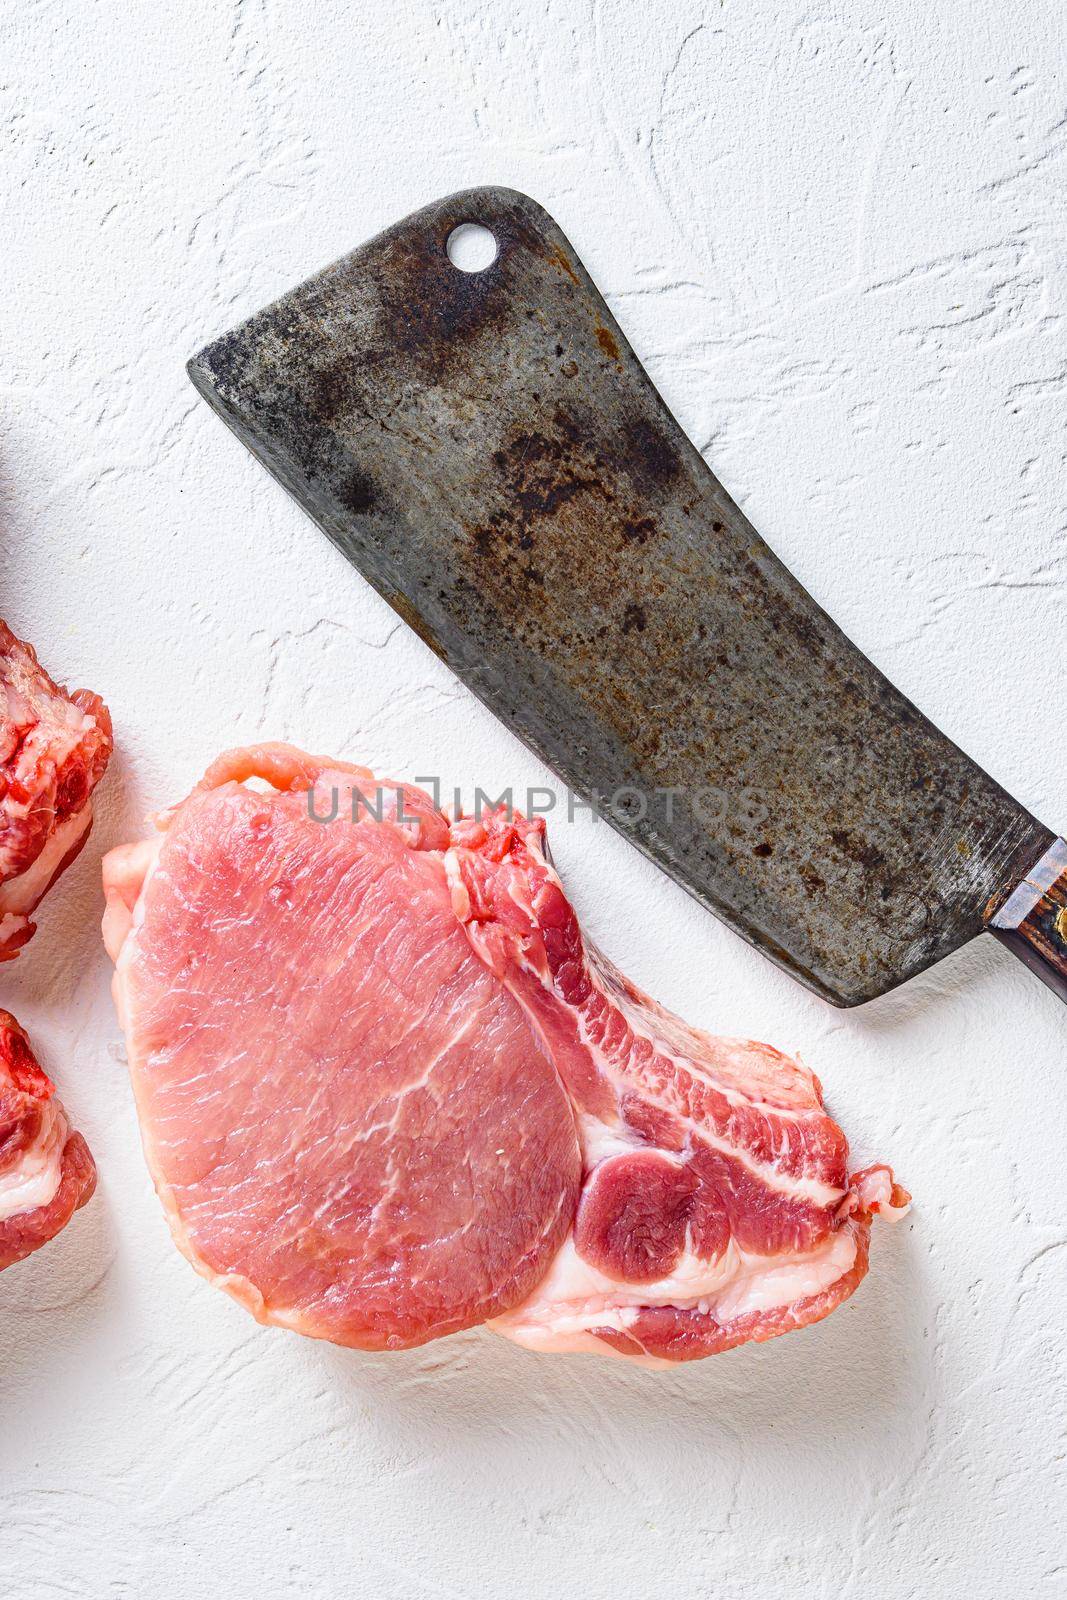 Organic bio Raw pork chops set for grilling, baking or frying, Fith butcher cleaver ower textured white background. top view by Ilianesolenyi